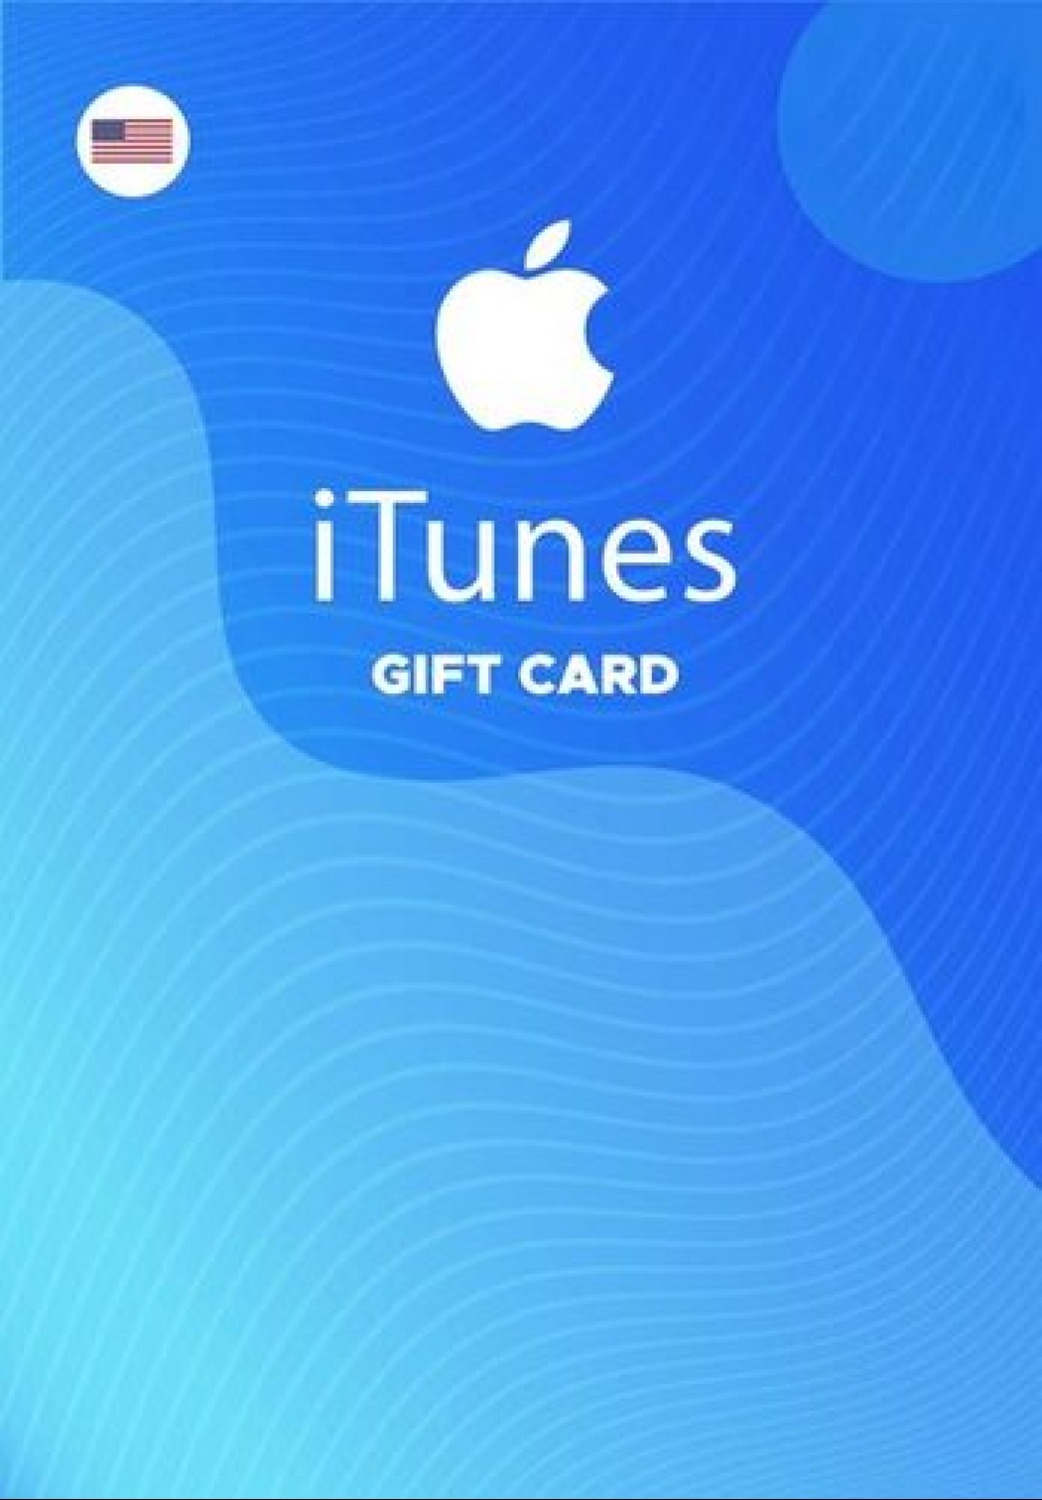 iTunes Gift Cards $50 for $42.50, $100 for $85 (Digital Delivery)